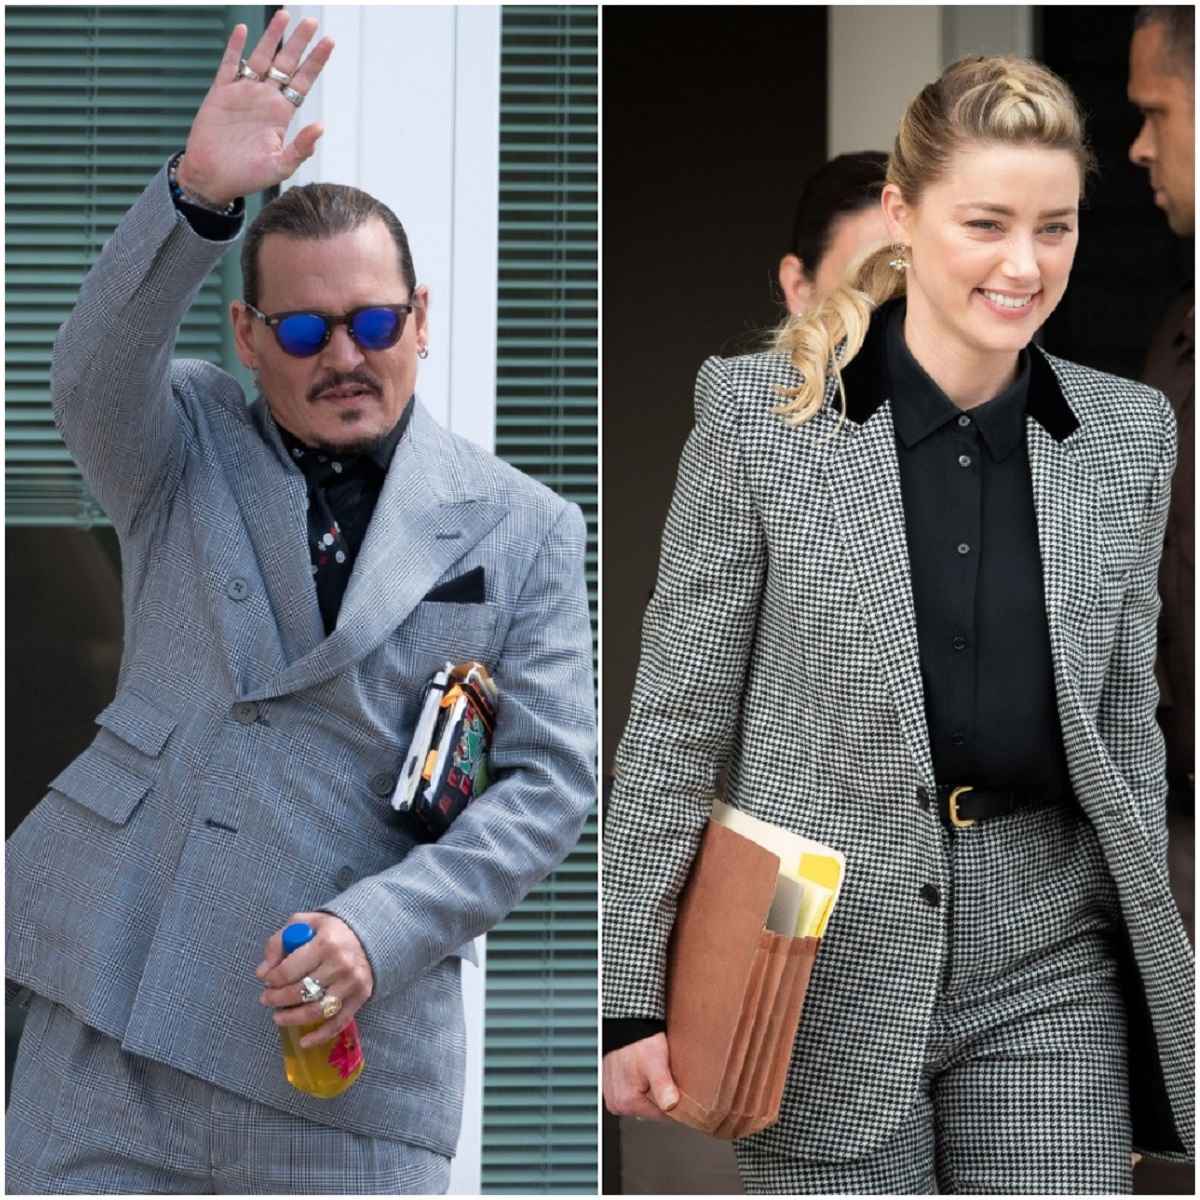 (L): Johnny Depp, whose career could bounce back, waves to his fans during a break outside court (R): Amber Heard, whose career could be over, departs at the close of the days of testimony